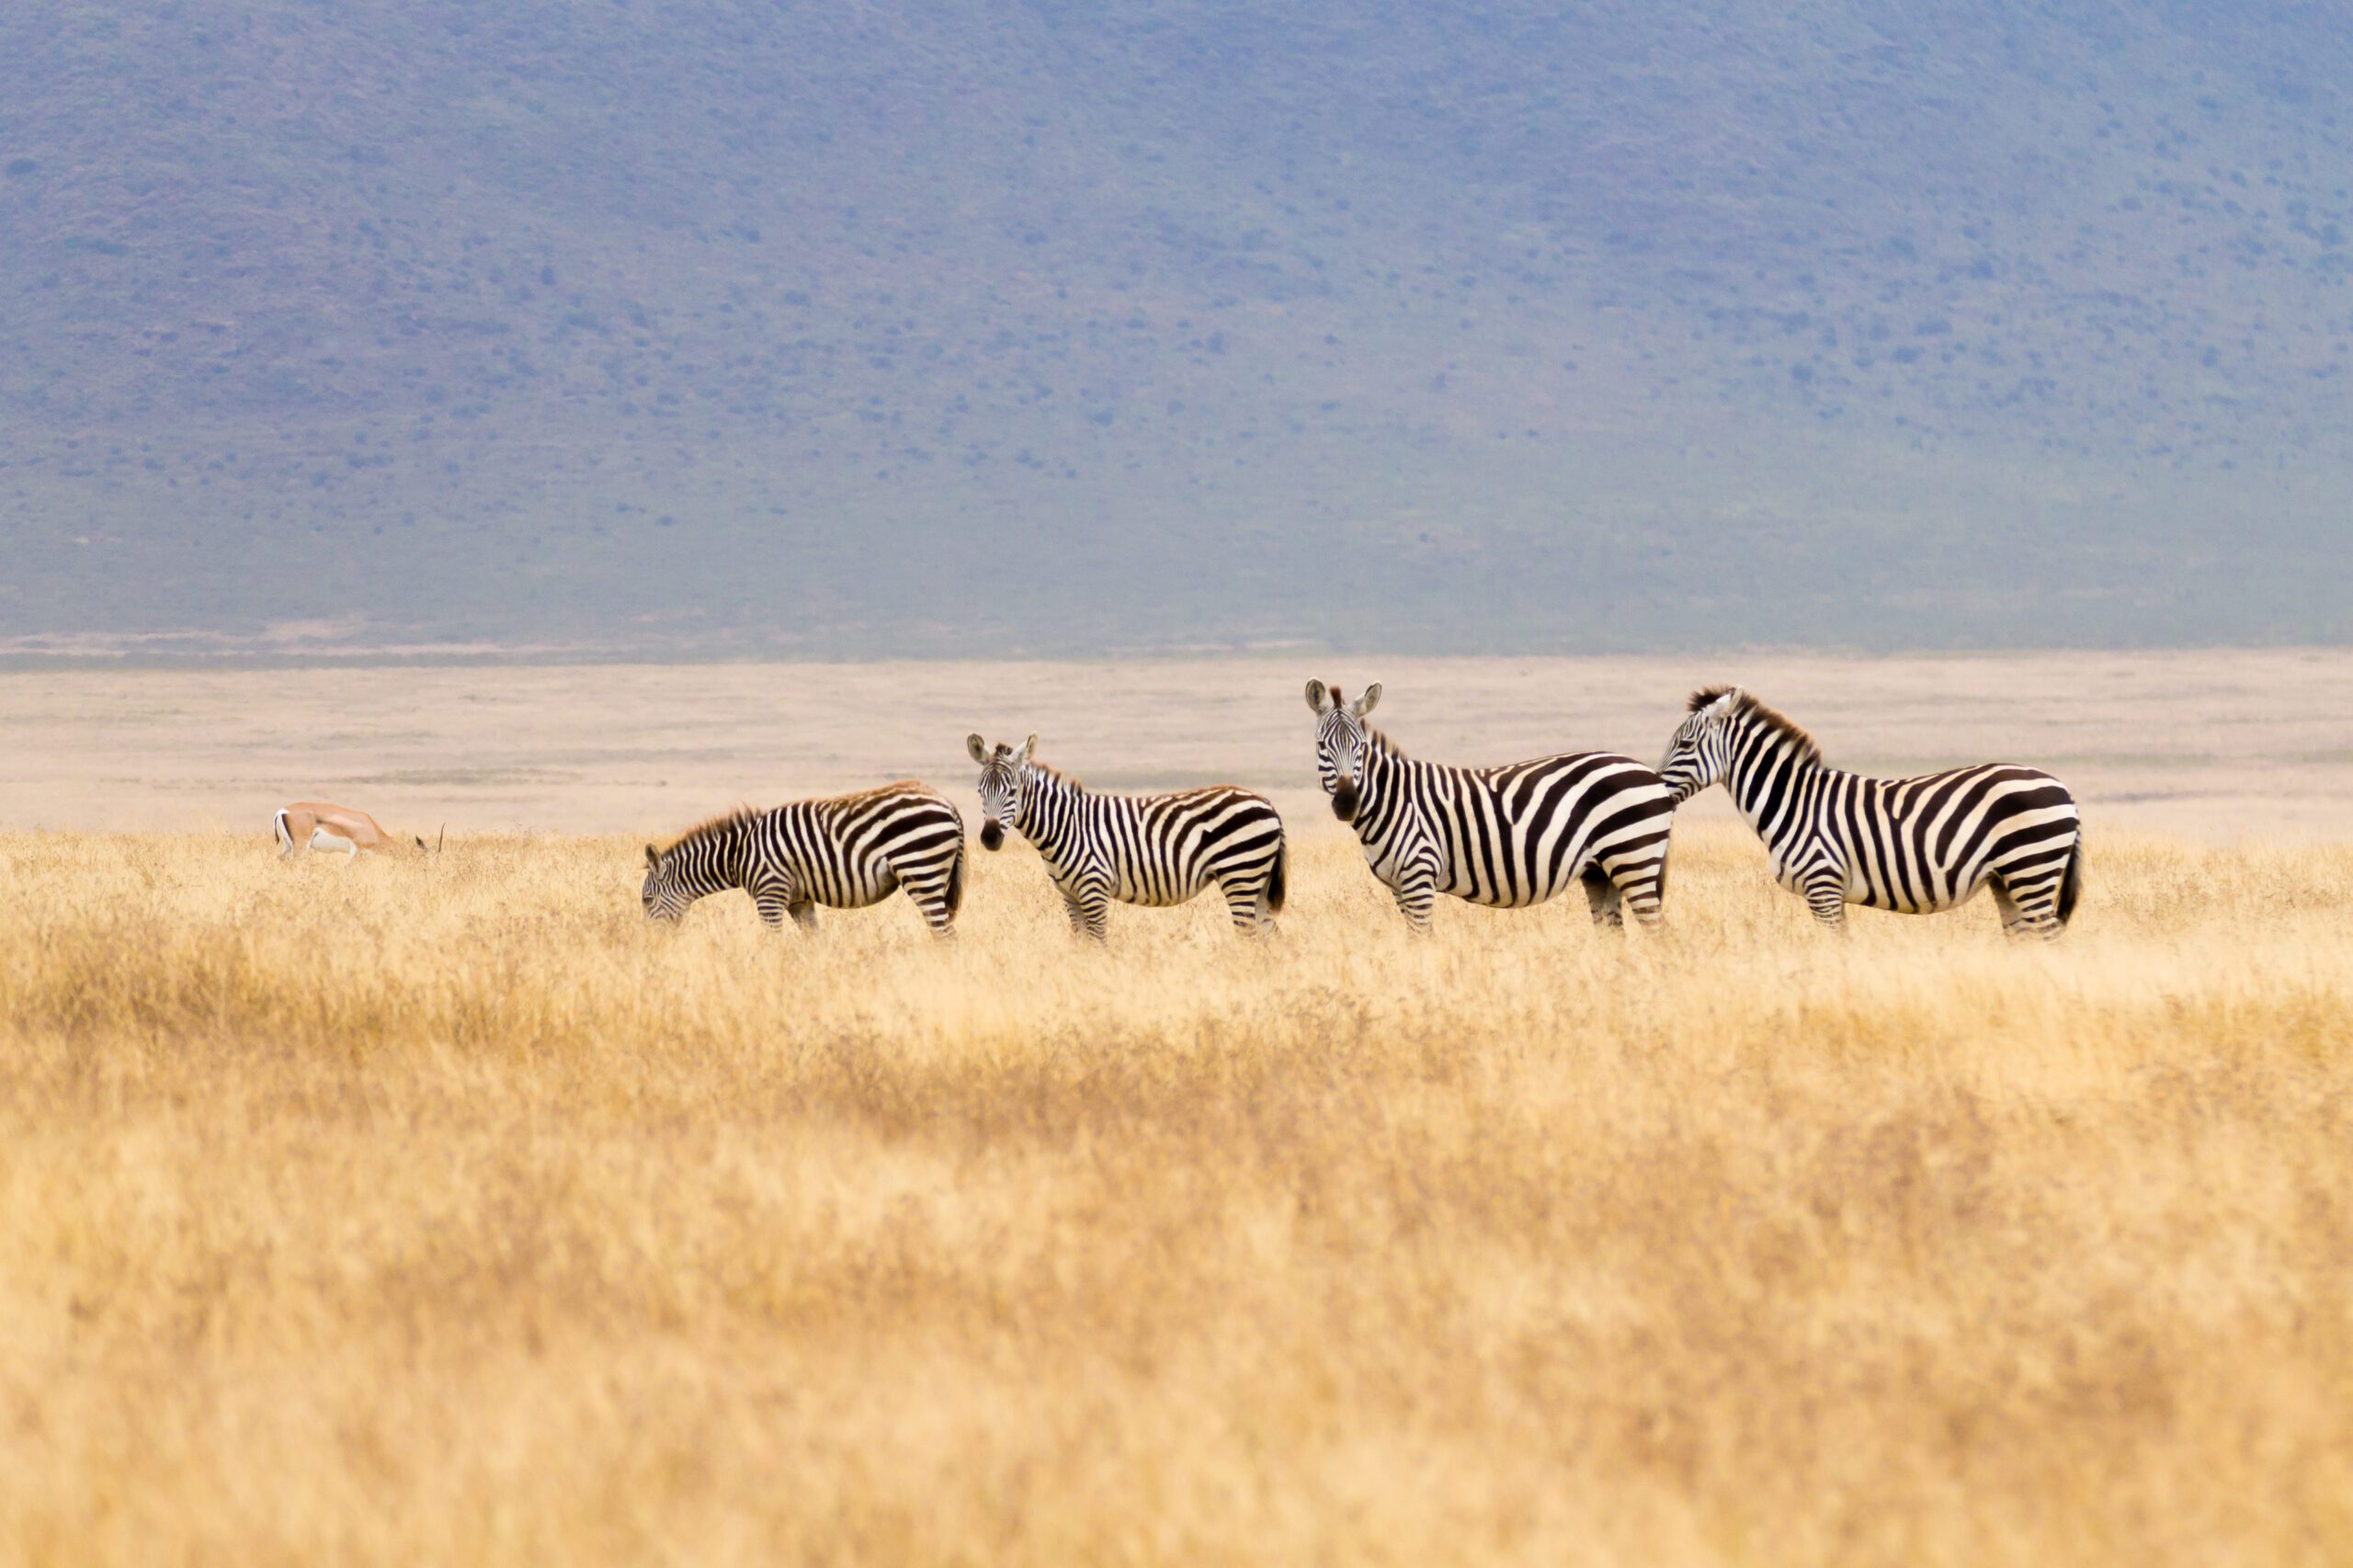 Zebras in a row on Ngorongoro Conservation Area crater, Tanzania. African wildlife